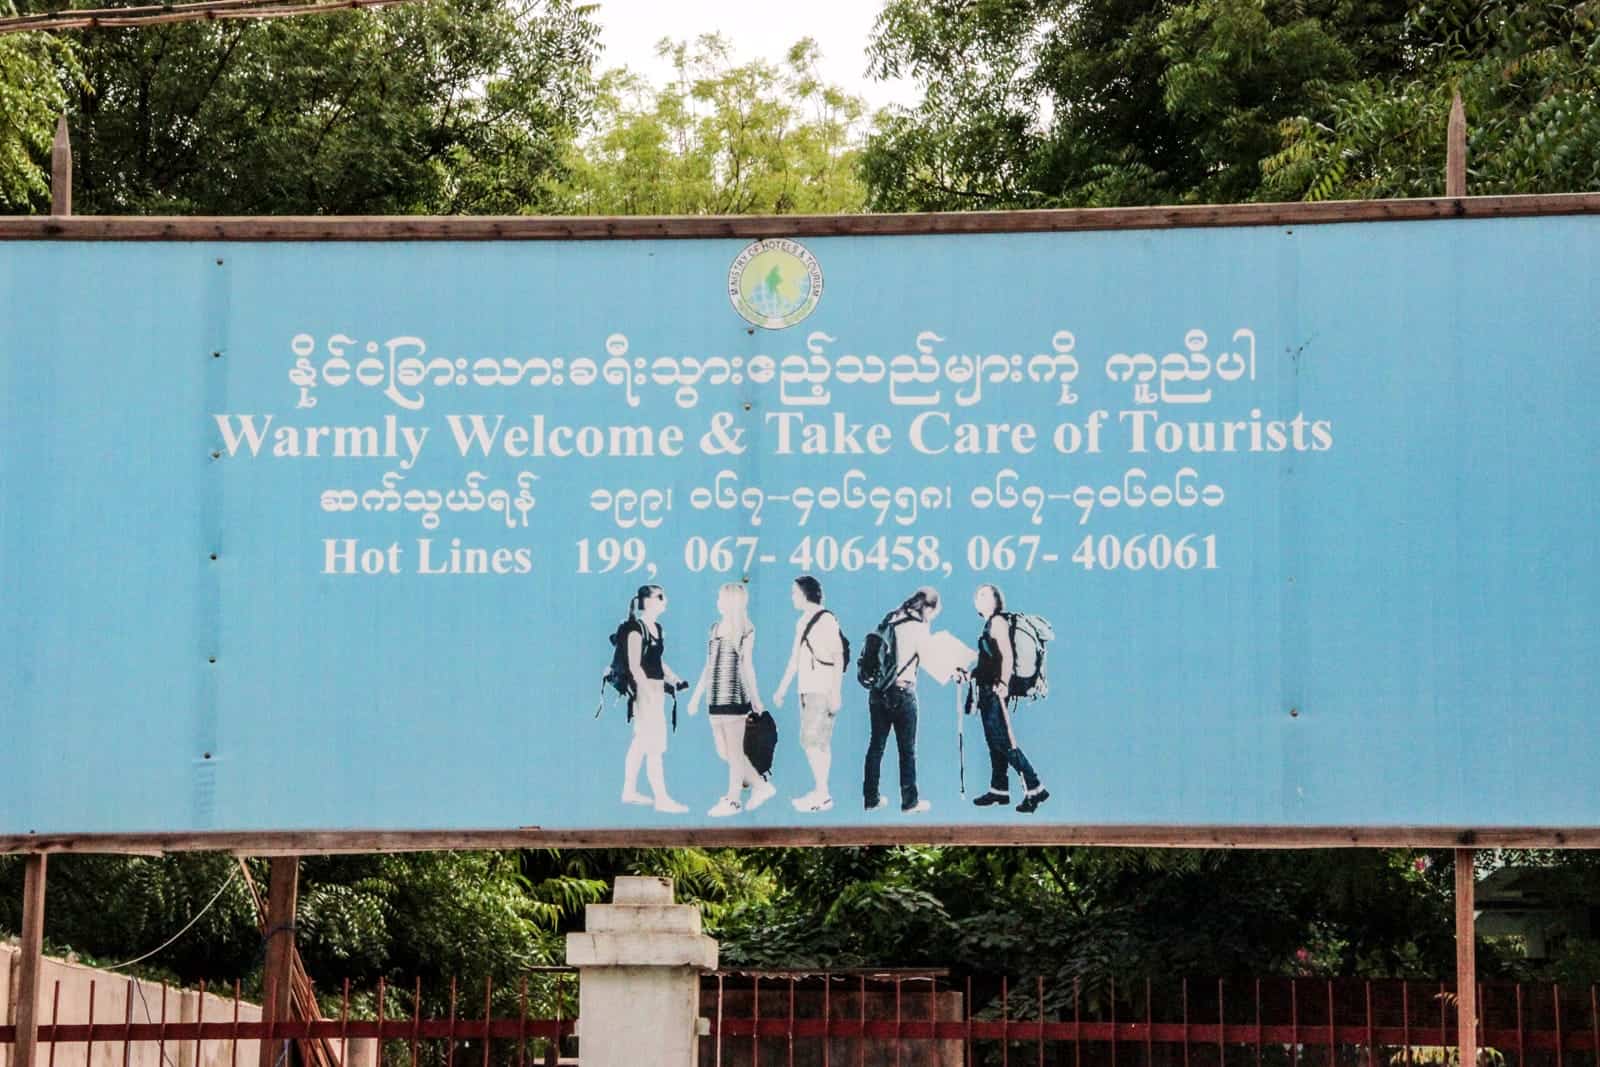 A sky blue coloured sign in Myanmar stating "Warmly Welcome & Take Care of Tourists" with a hotline number 